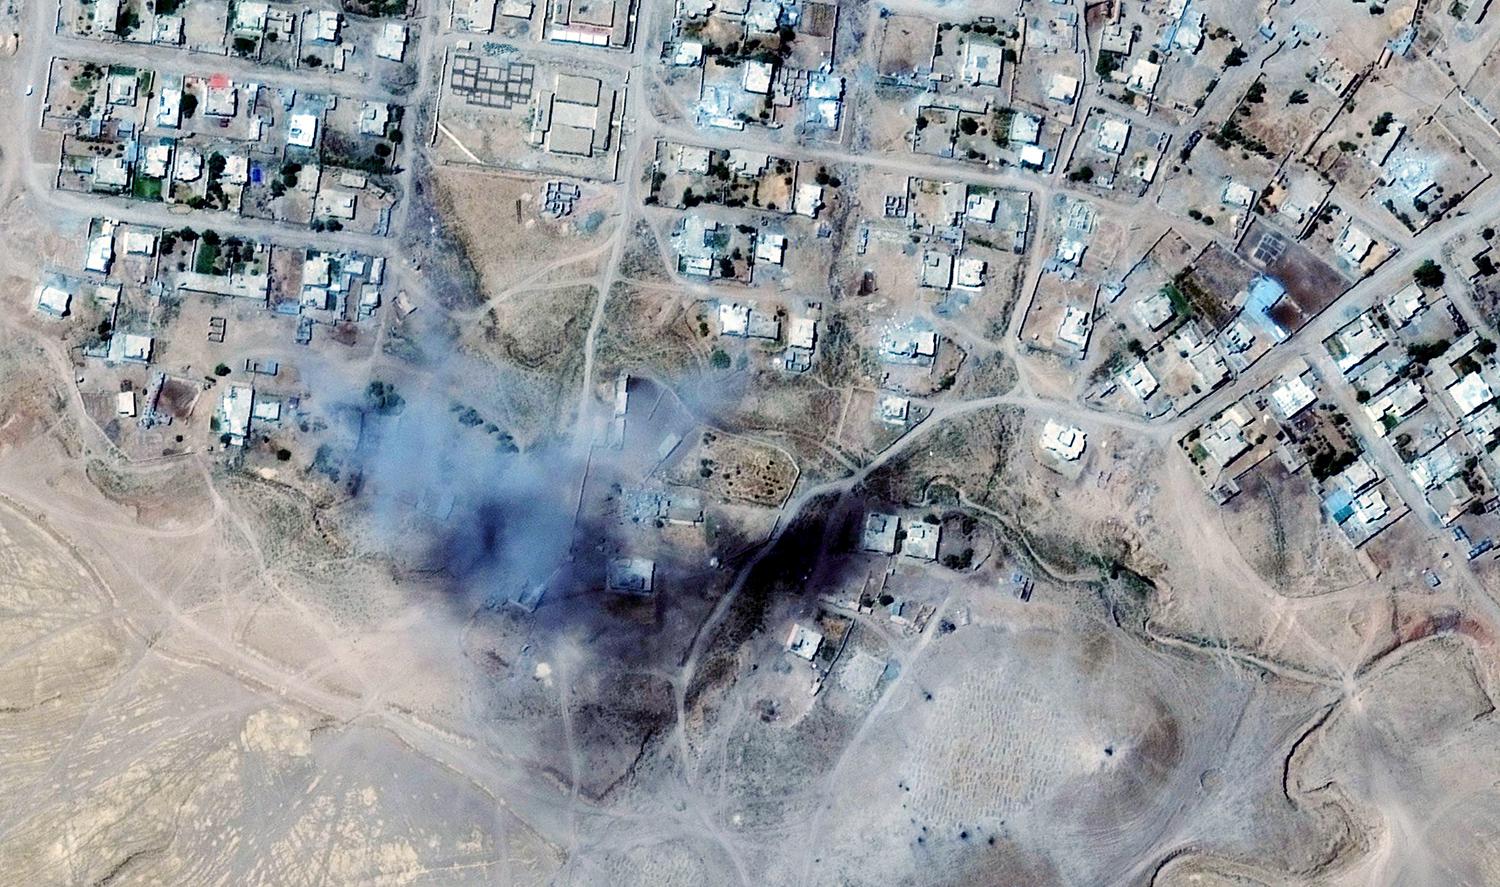 Smoke plume from building demolition on September 7, 2014. Barzan, Nineveh Governorate.